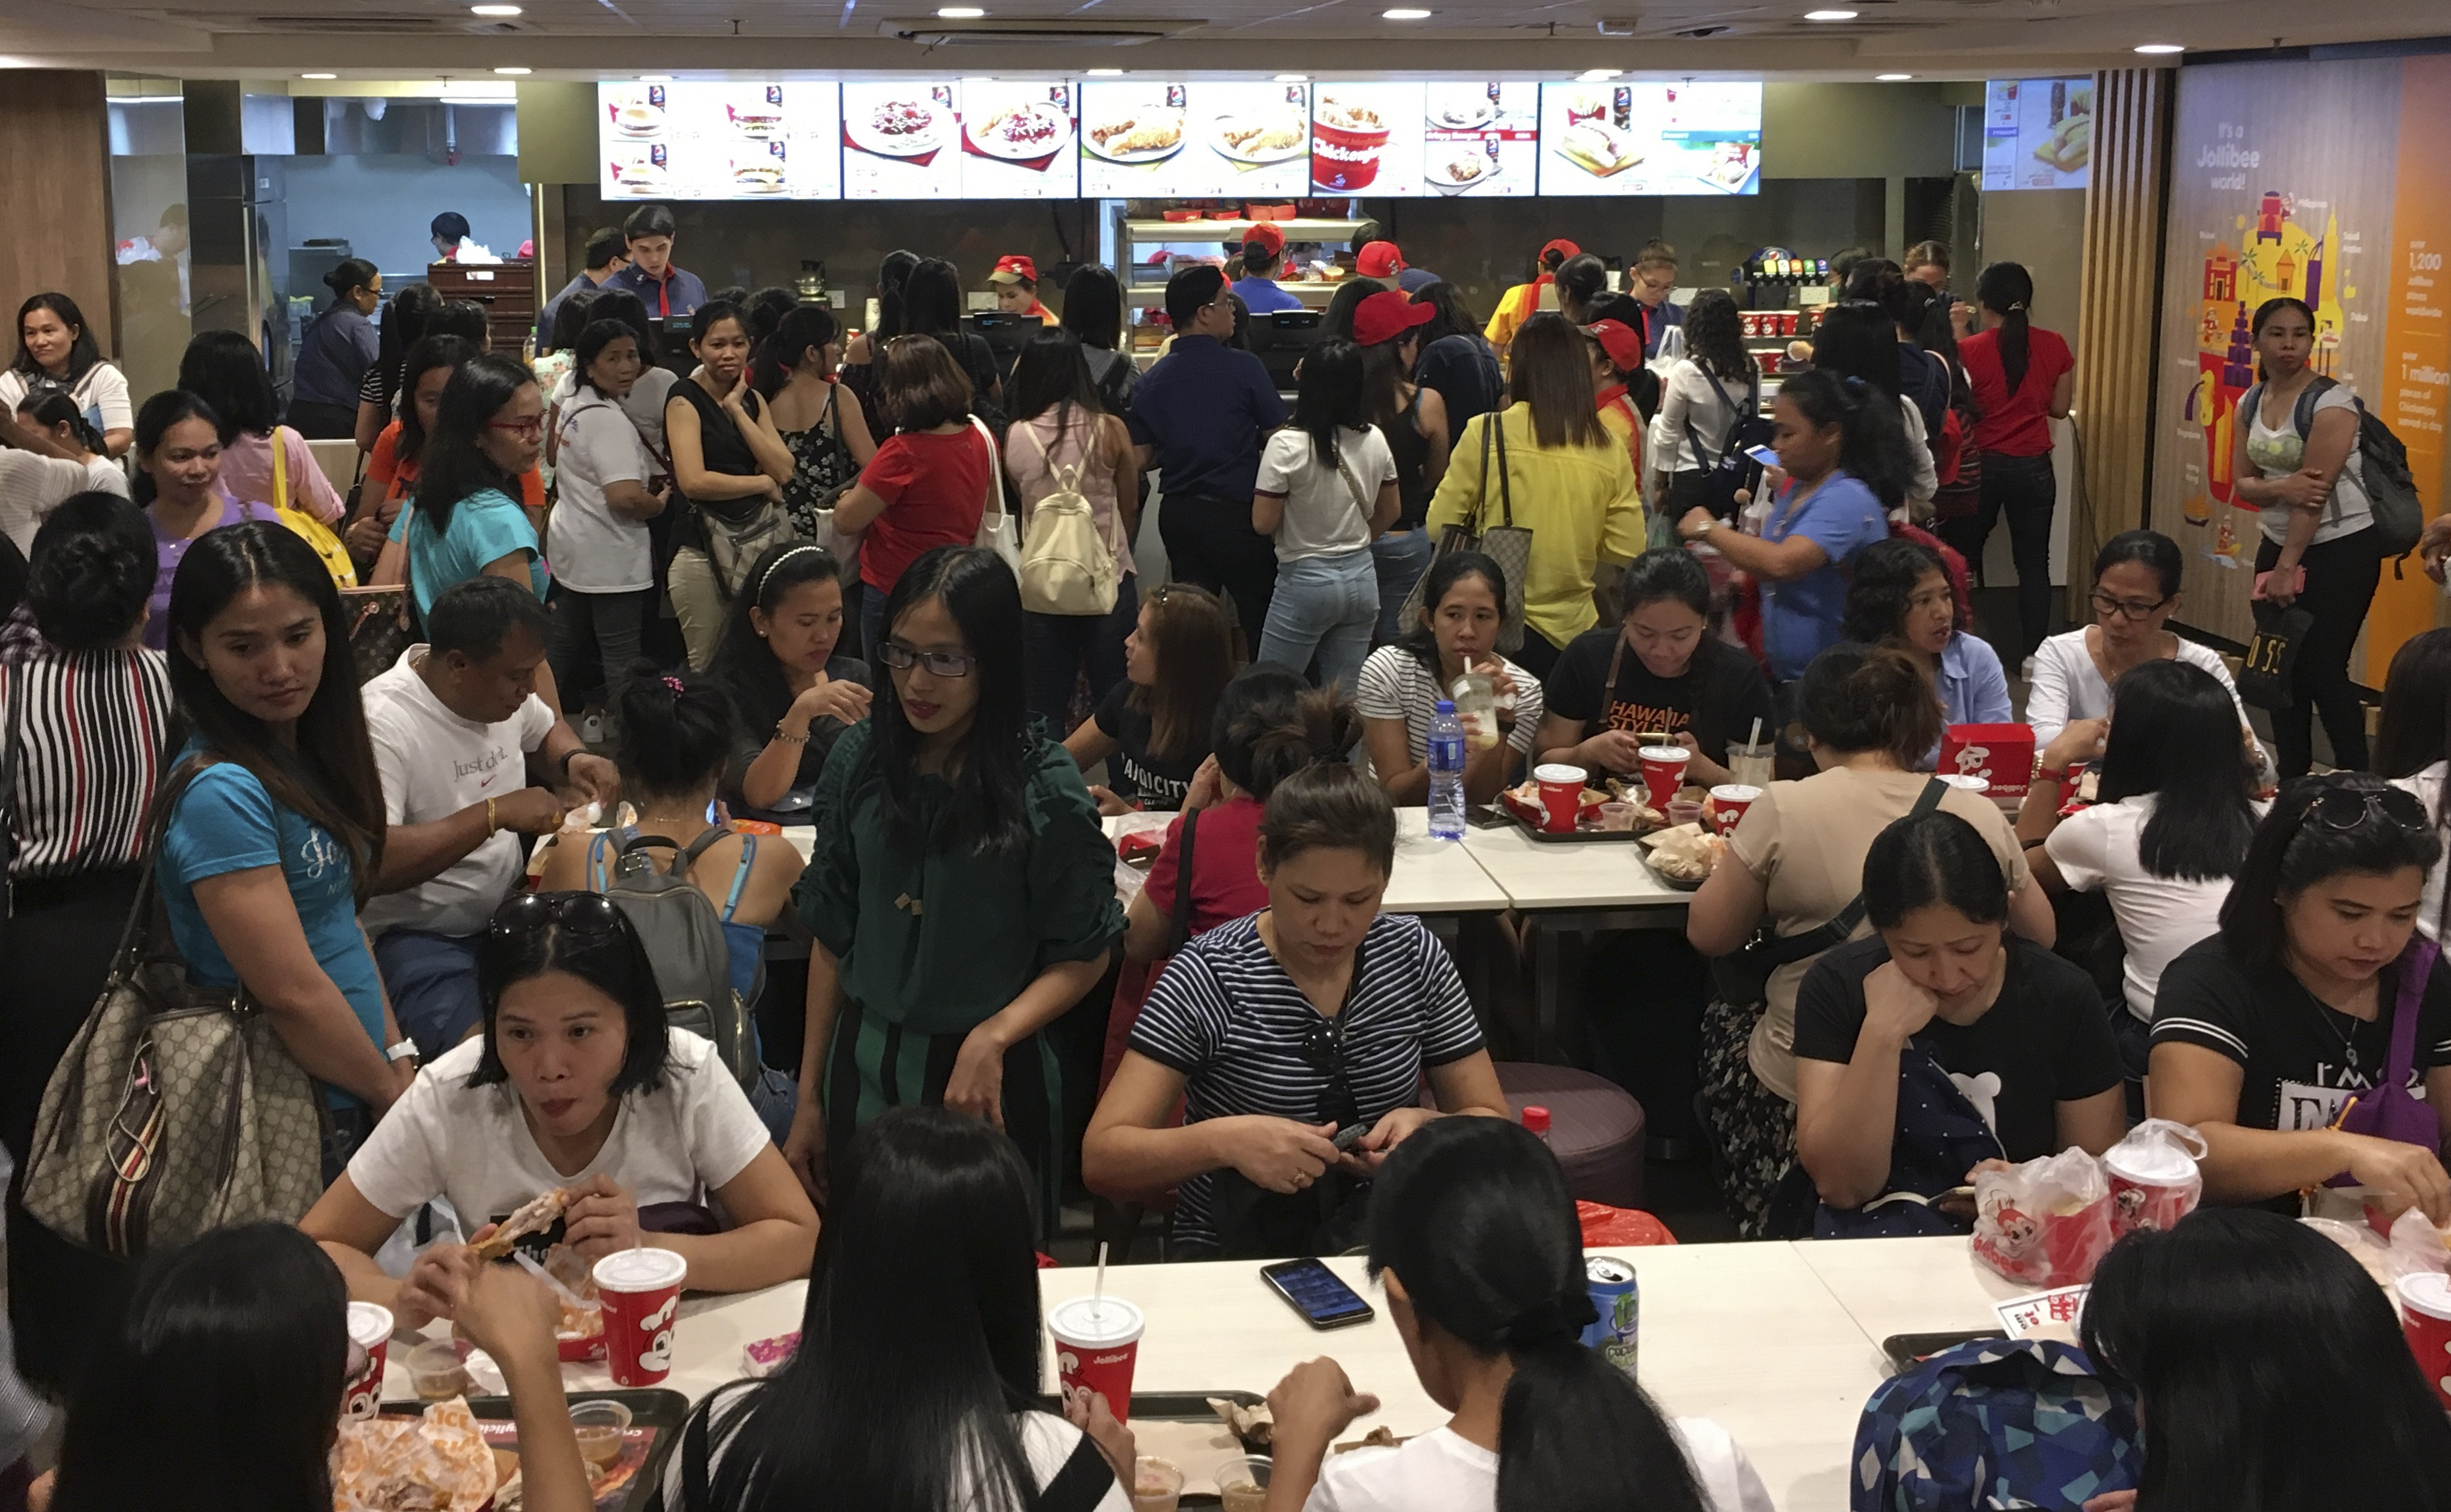 A Jollibee outlet is not just a place to dine in for many Filipino domestic helpers in the city. It is a place to meet, take selfies, and chat with their friends during their holidays. 30SEP18 Photo: Cheryl Arcibal